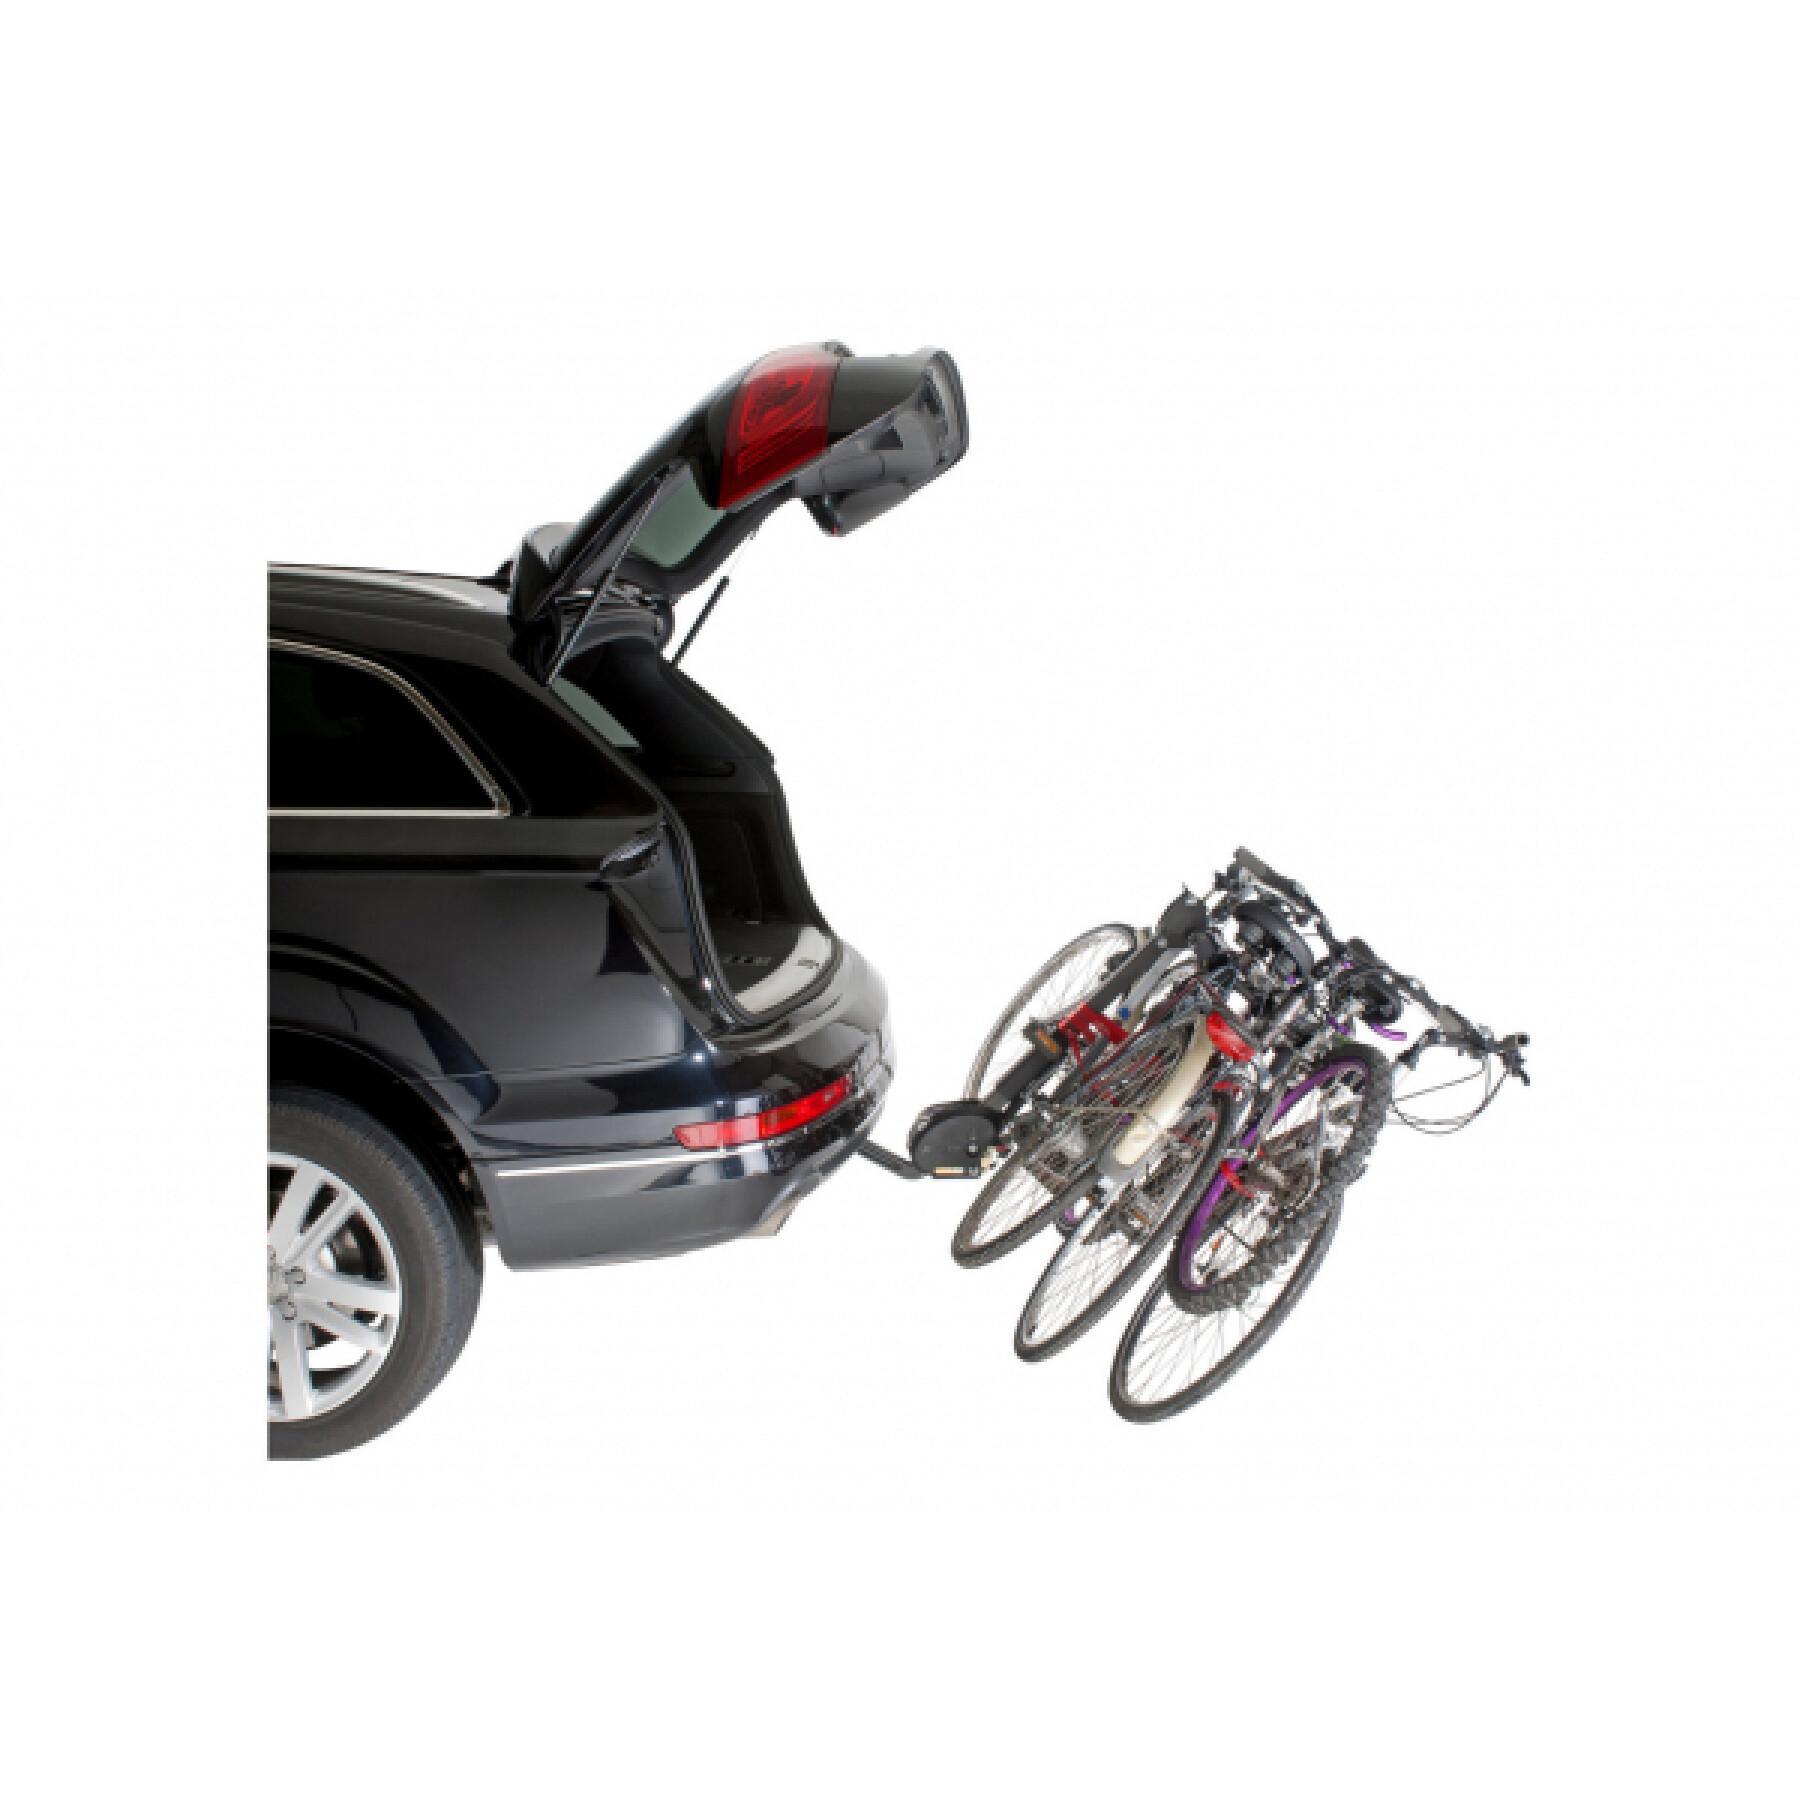 Hanging bike carrier for 4 bikes with anti-theft device, easy system for mounting rapide - french manufacturing Mottez Hercule homologue ce - 60 kgs